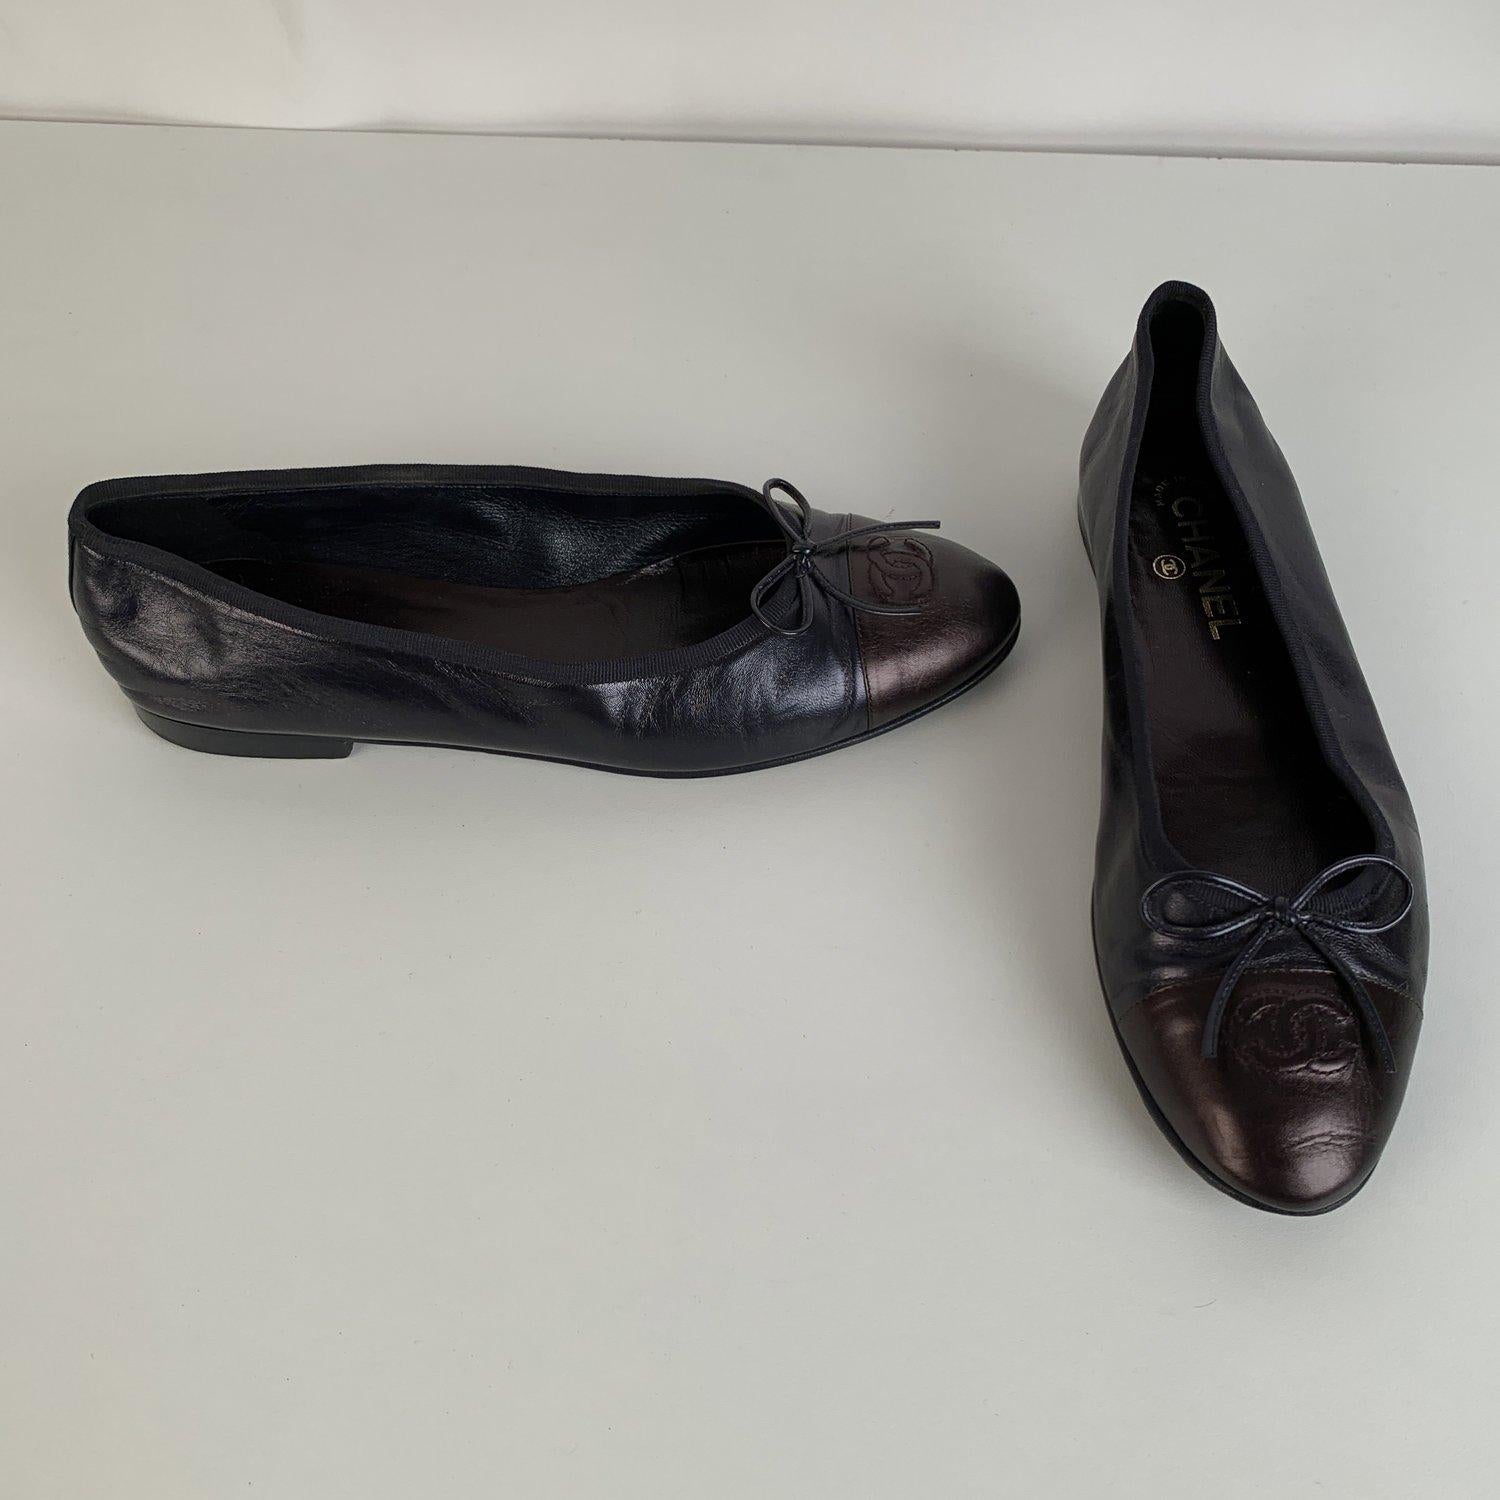 MATERIAL: Leather COLOR: Black MODEL: Ballet Shoes GENDER: Women SIZE: 41 Condition A - EXCELLENT Gently used. Some creases on leather due to normal use, some wear of use on the outsoles - Internal Ref: - 23846715-XX71 - Shipping with DHL Express